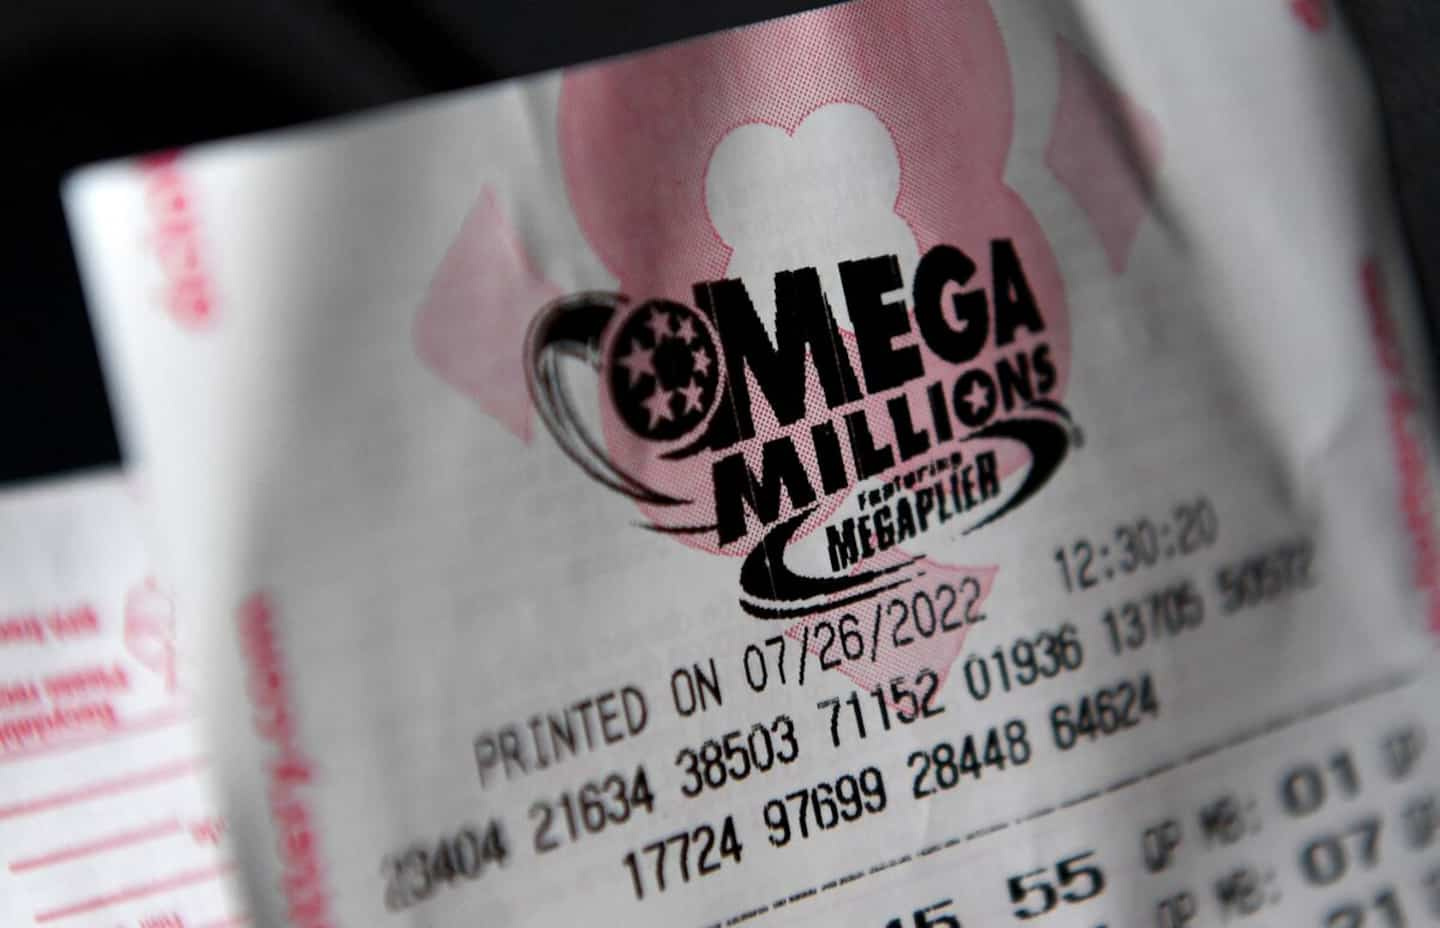 US lottery jackpot exceeds $1 billion, one of biggest wins in history